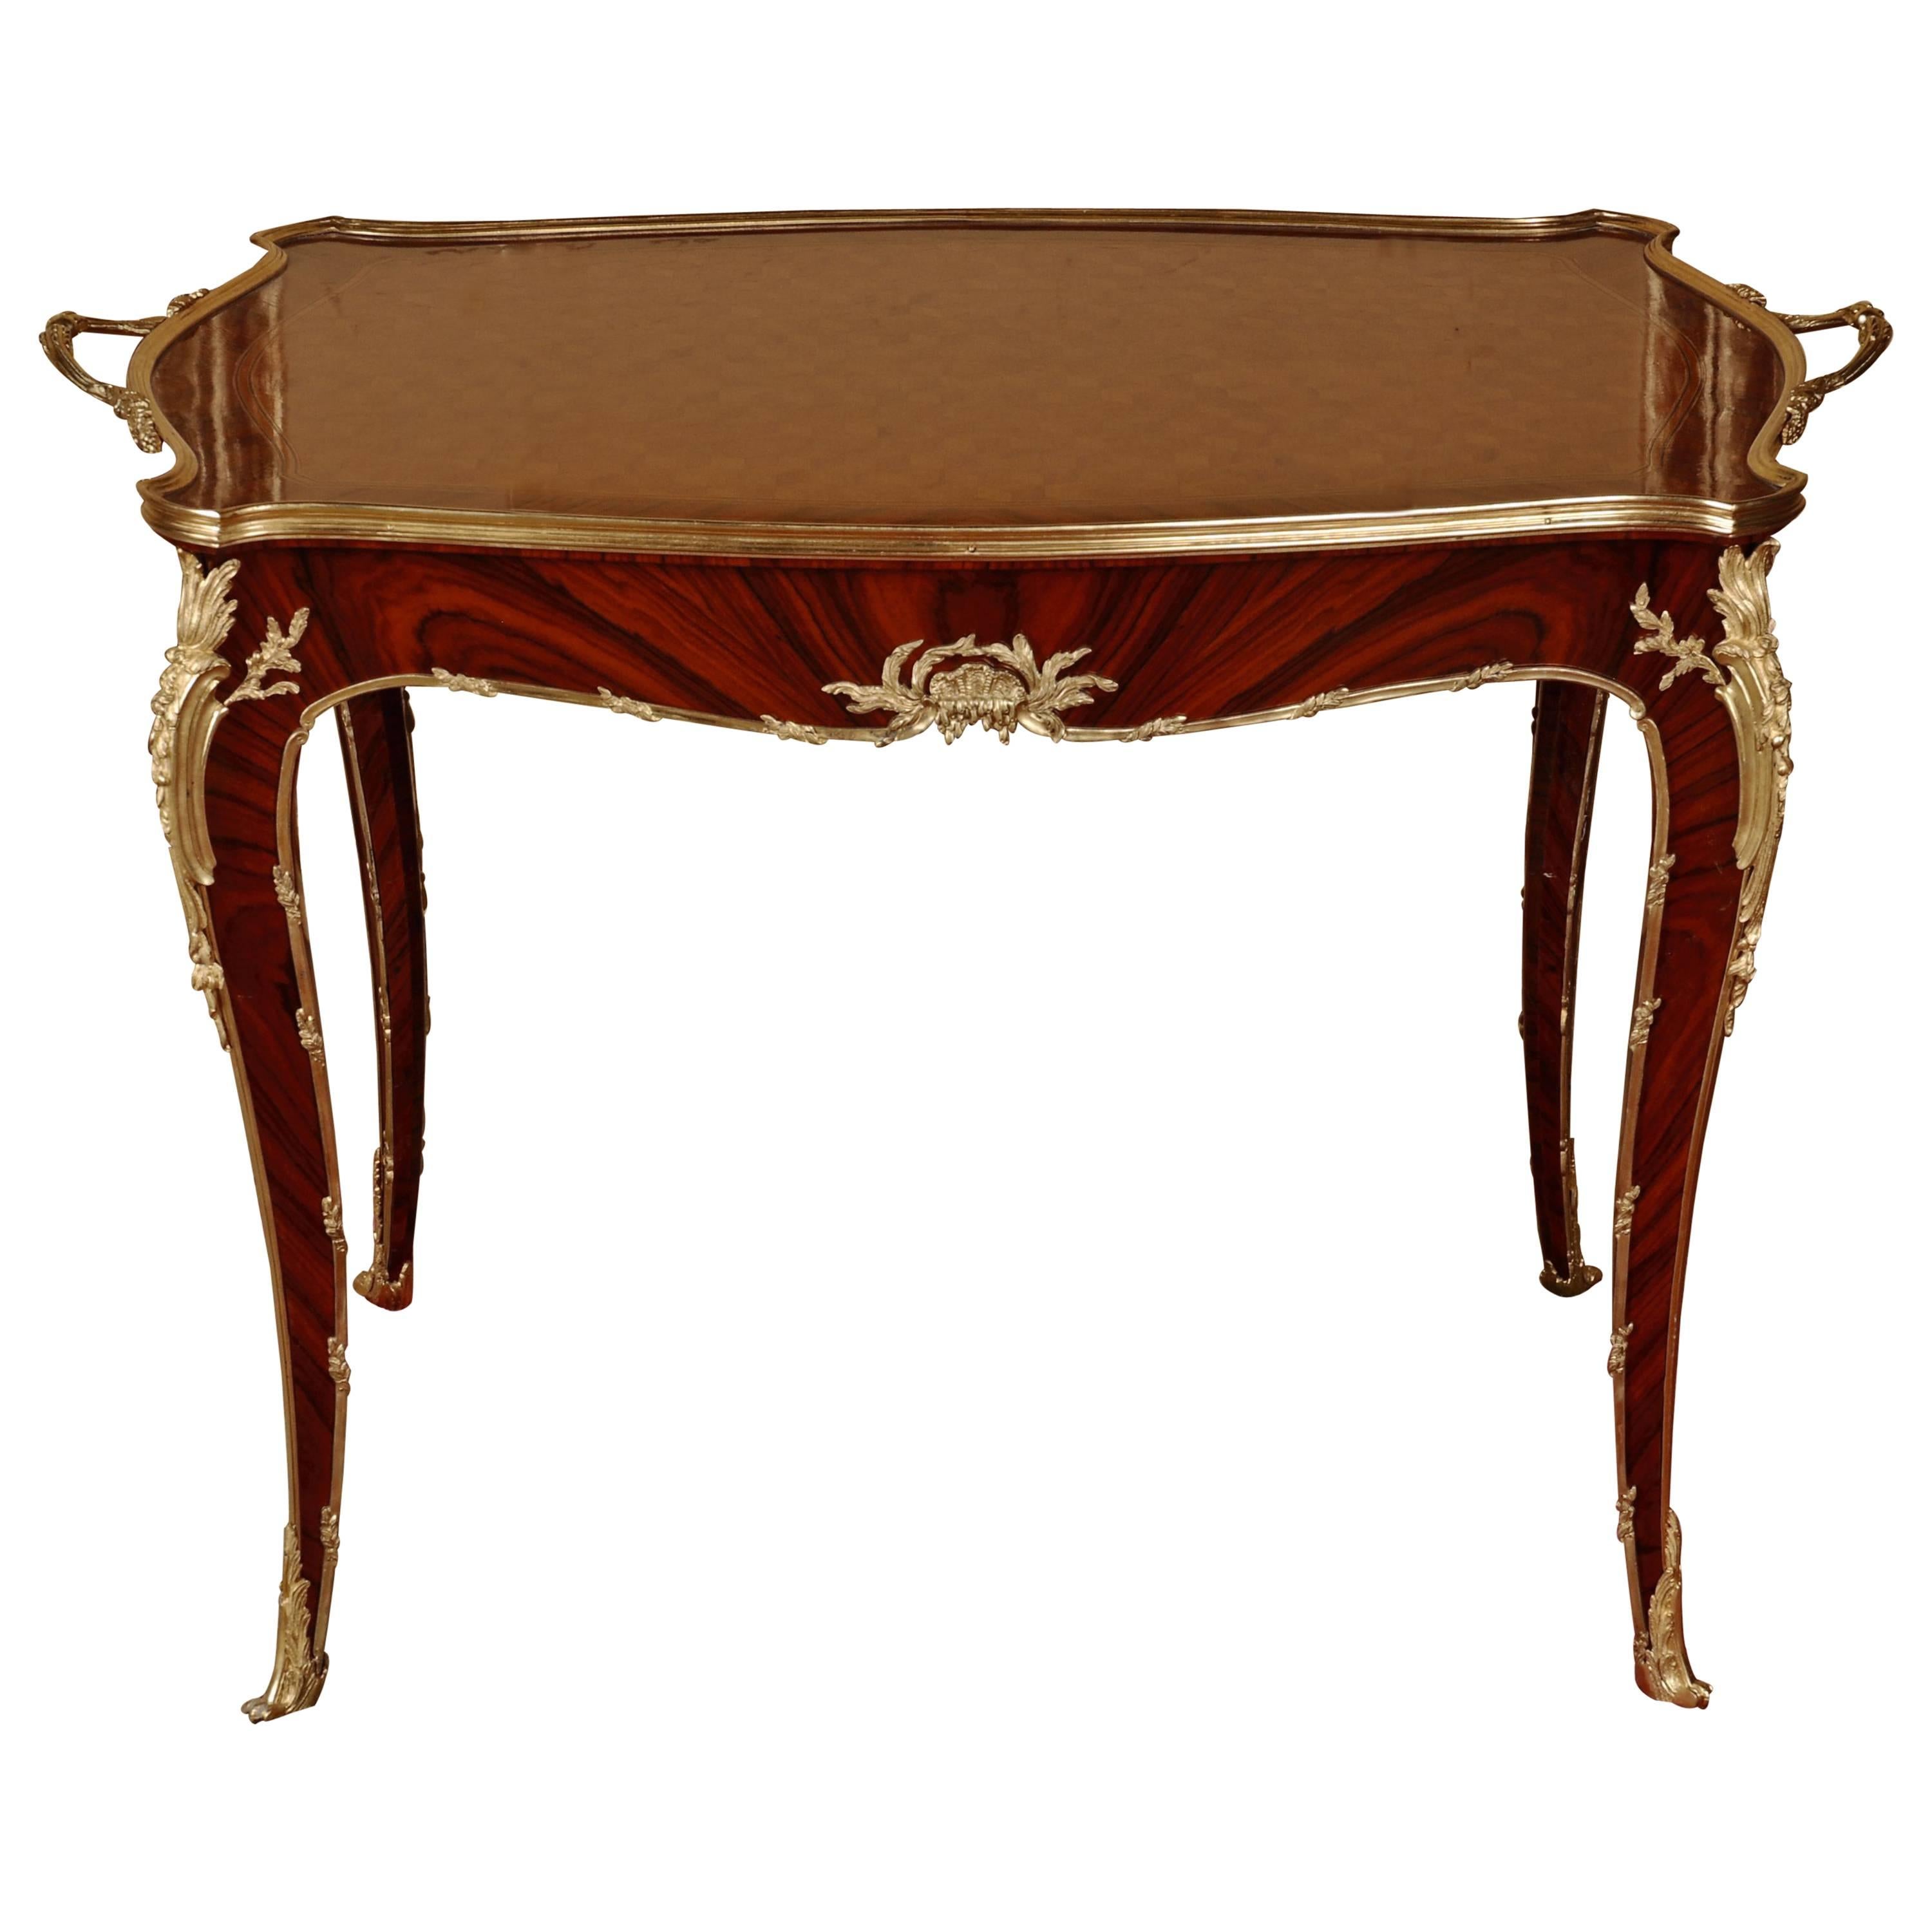 20th Century Louis XV Style Serving Table from a Design by Francois Linke